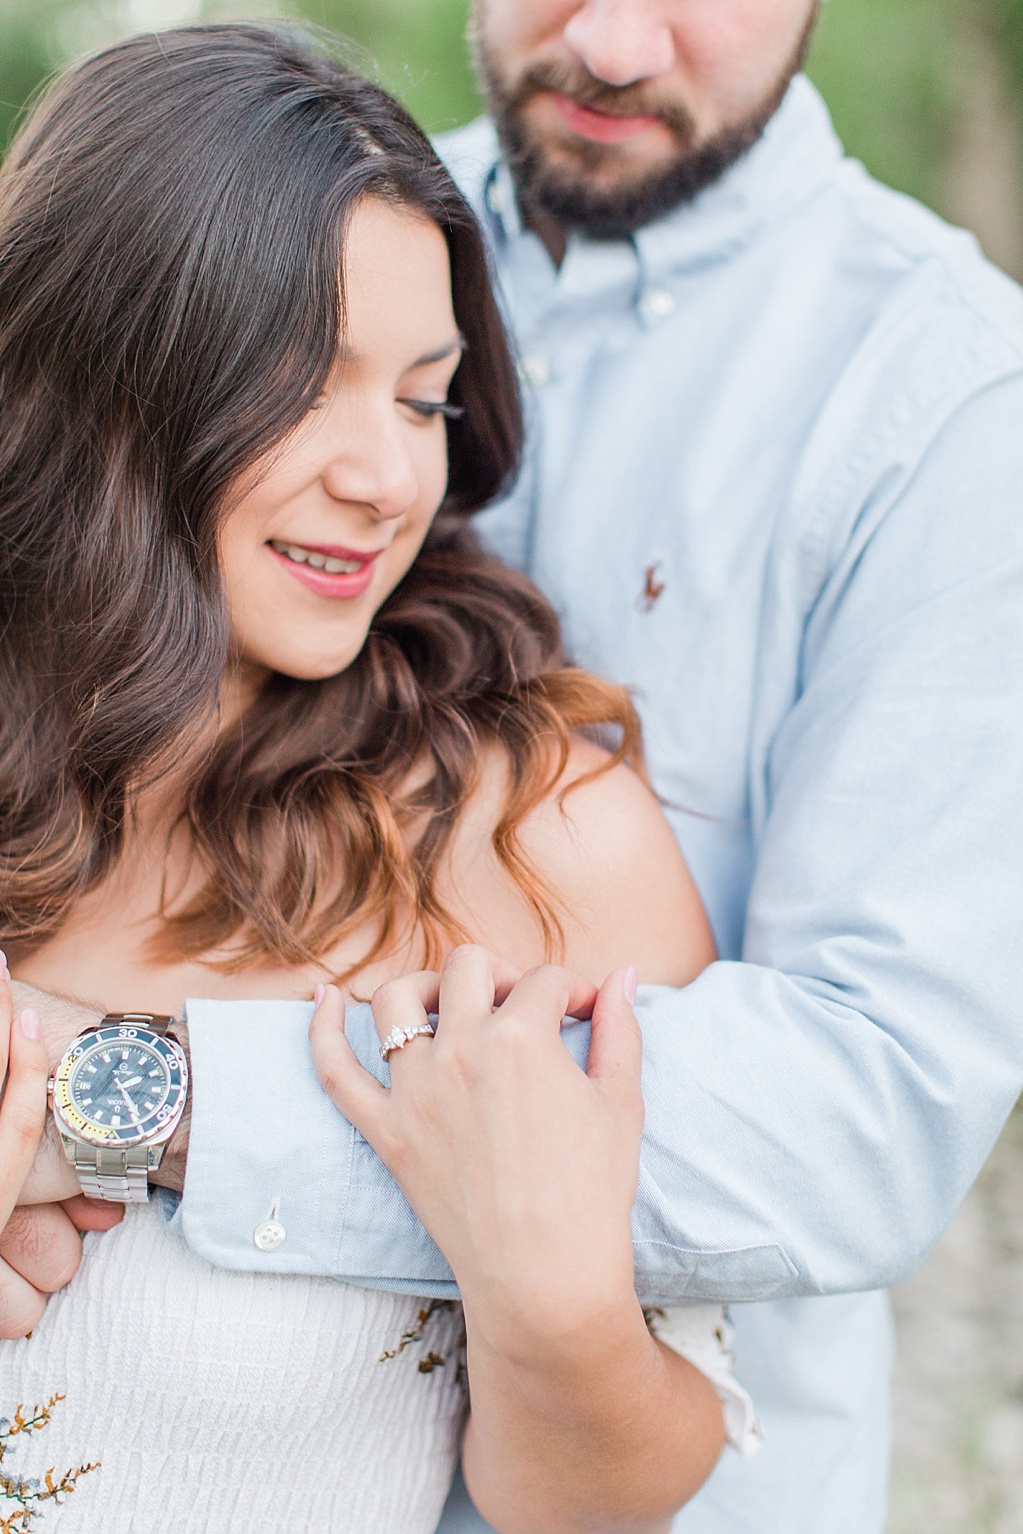 Eagle Dancer Ranch Engagement Photo Session in Boerne, Texas by Allison Jeffers Photography 0057